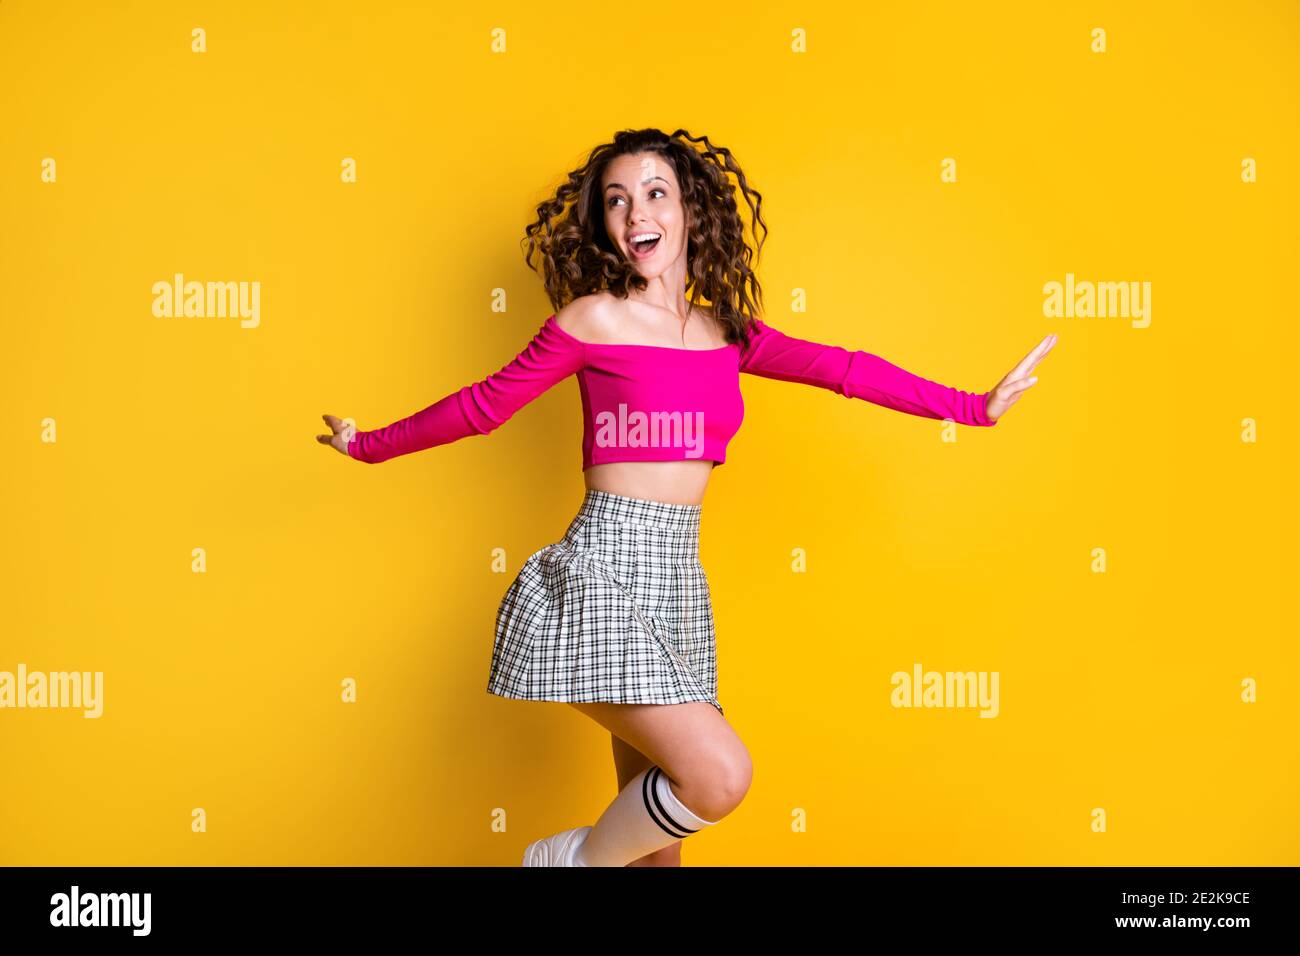 Photo portrait of woman skipping jumping standing on one leg hands to sides open mouth wearing fuchsia crop-top plaid skirt knee-high socks isolated Stock Photo